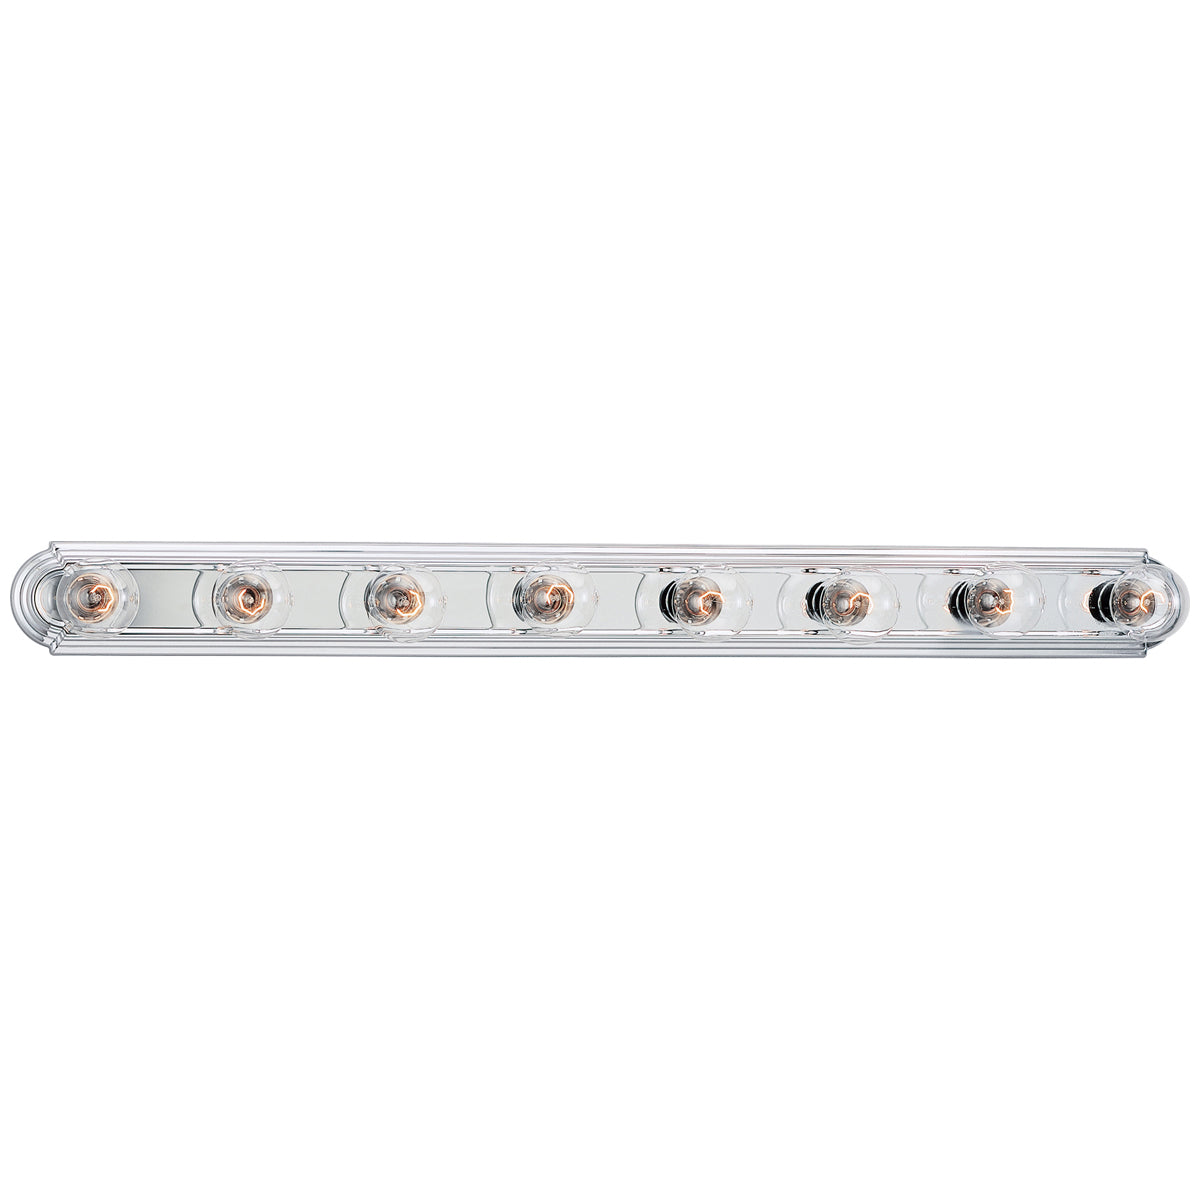 Sea Gull Lighting De-Lovely 8-Light Wall/Bath Sconce without Bulb